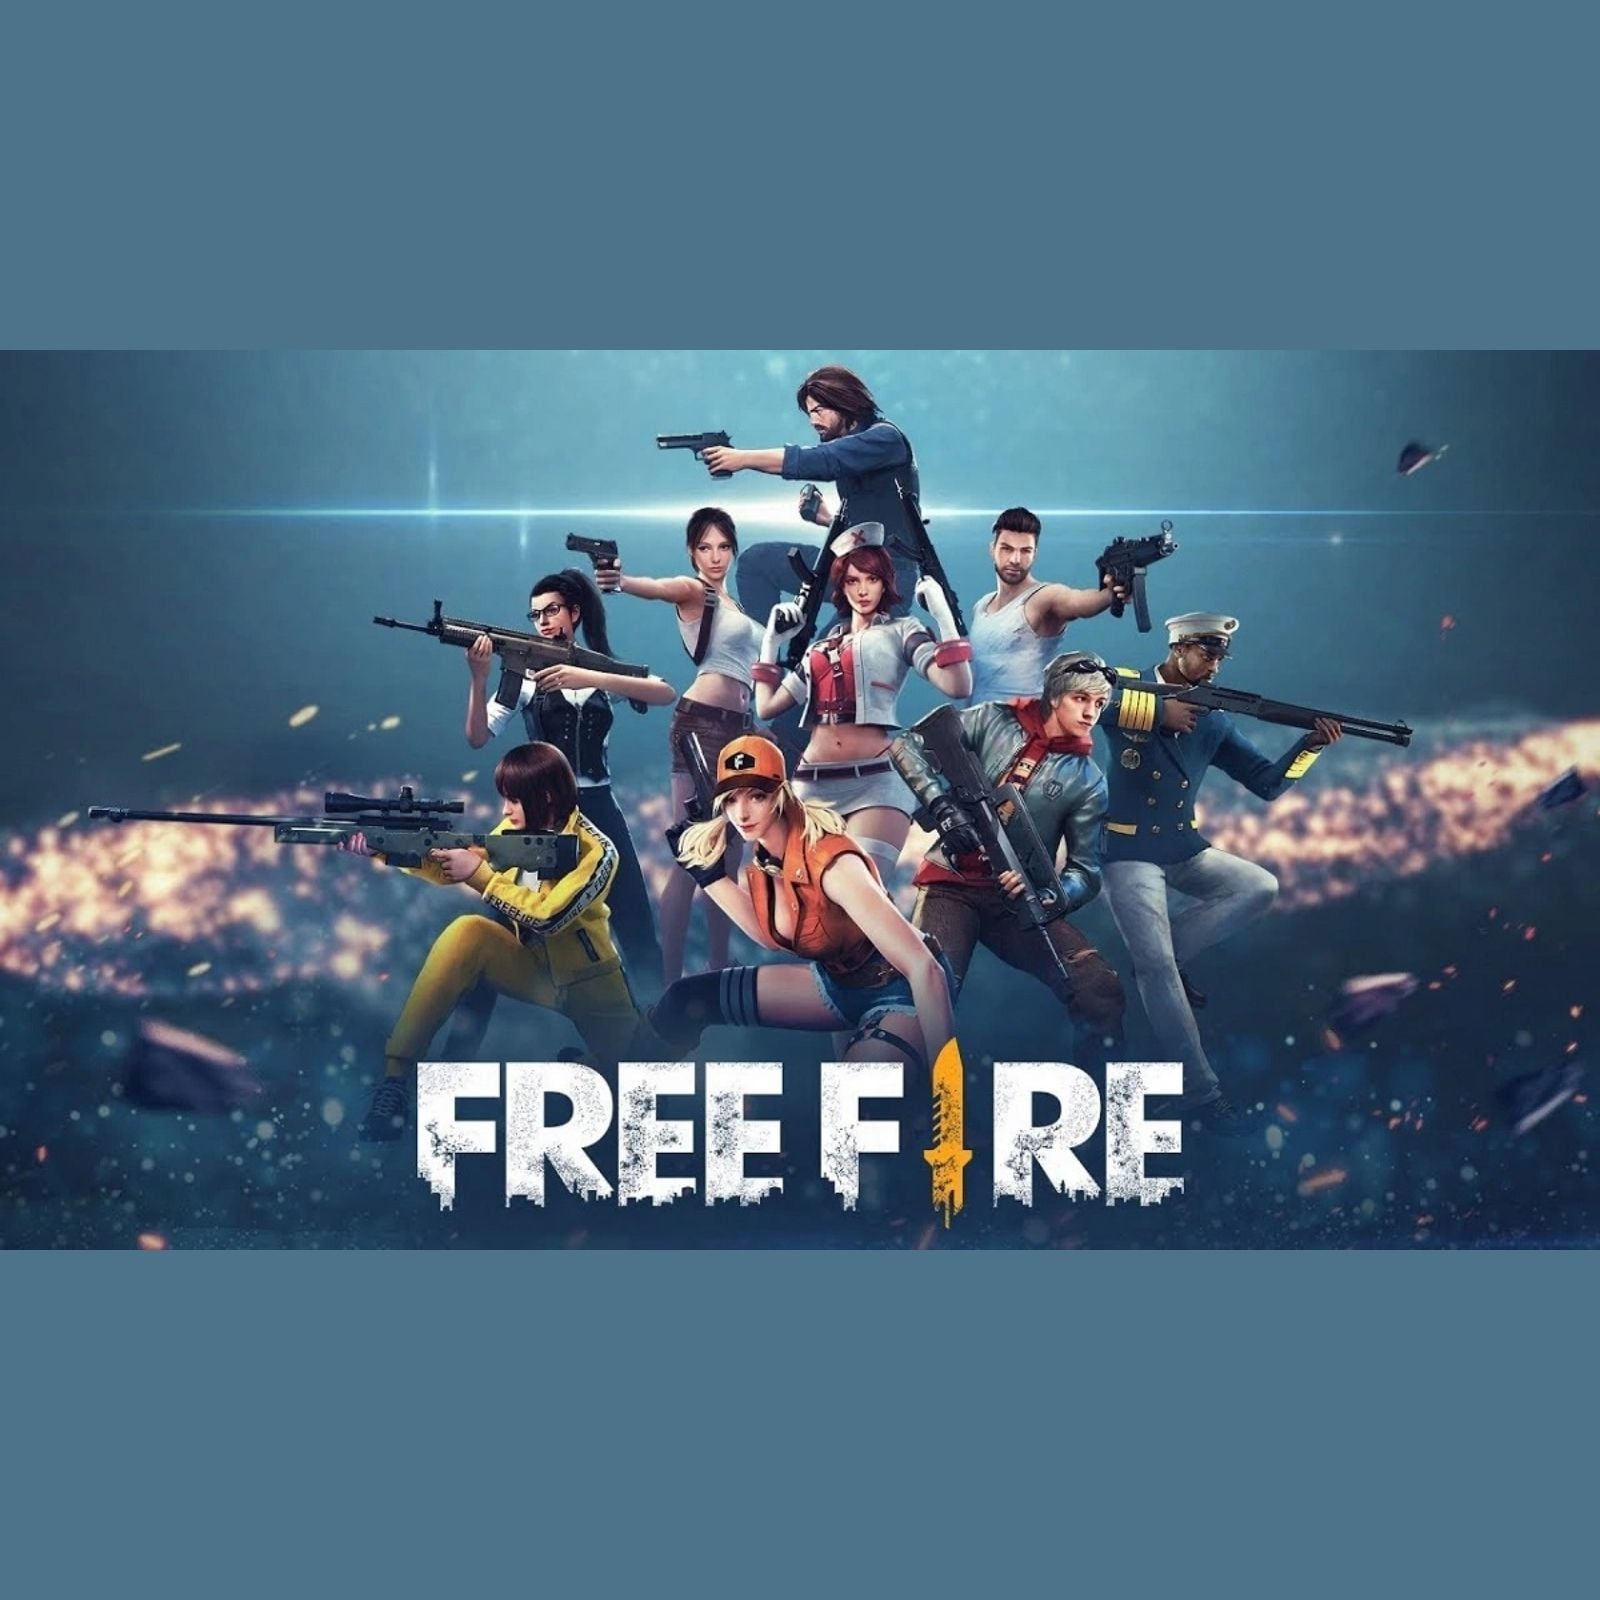 Garena Free Fire Max redeem codes for October 11, 2022: Check details